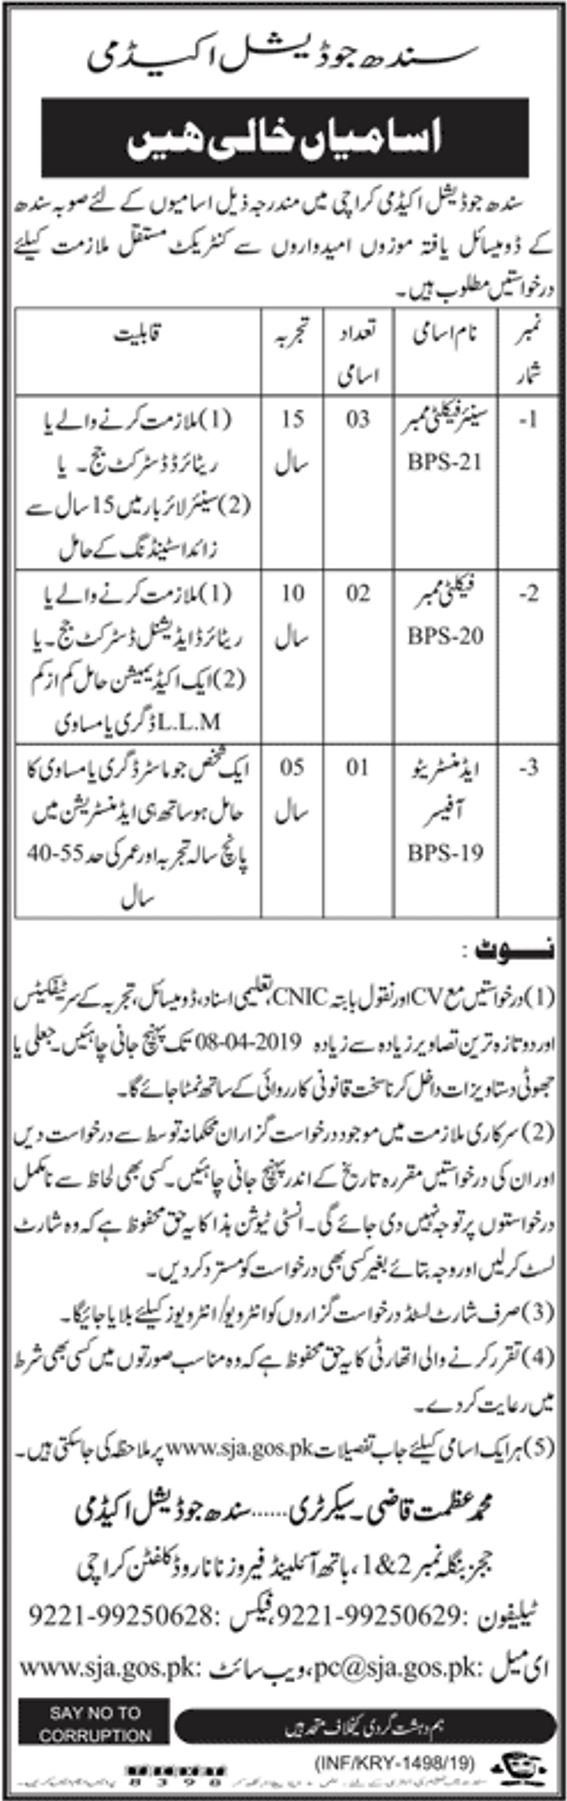 Sindh Judicial Academy (SJA) Jobs 2019 for 6+ Admin Officer and Faculty Members